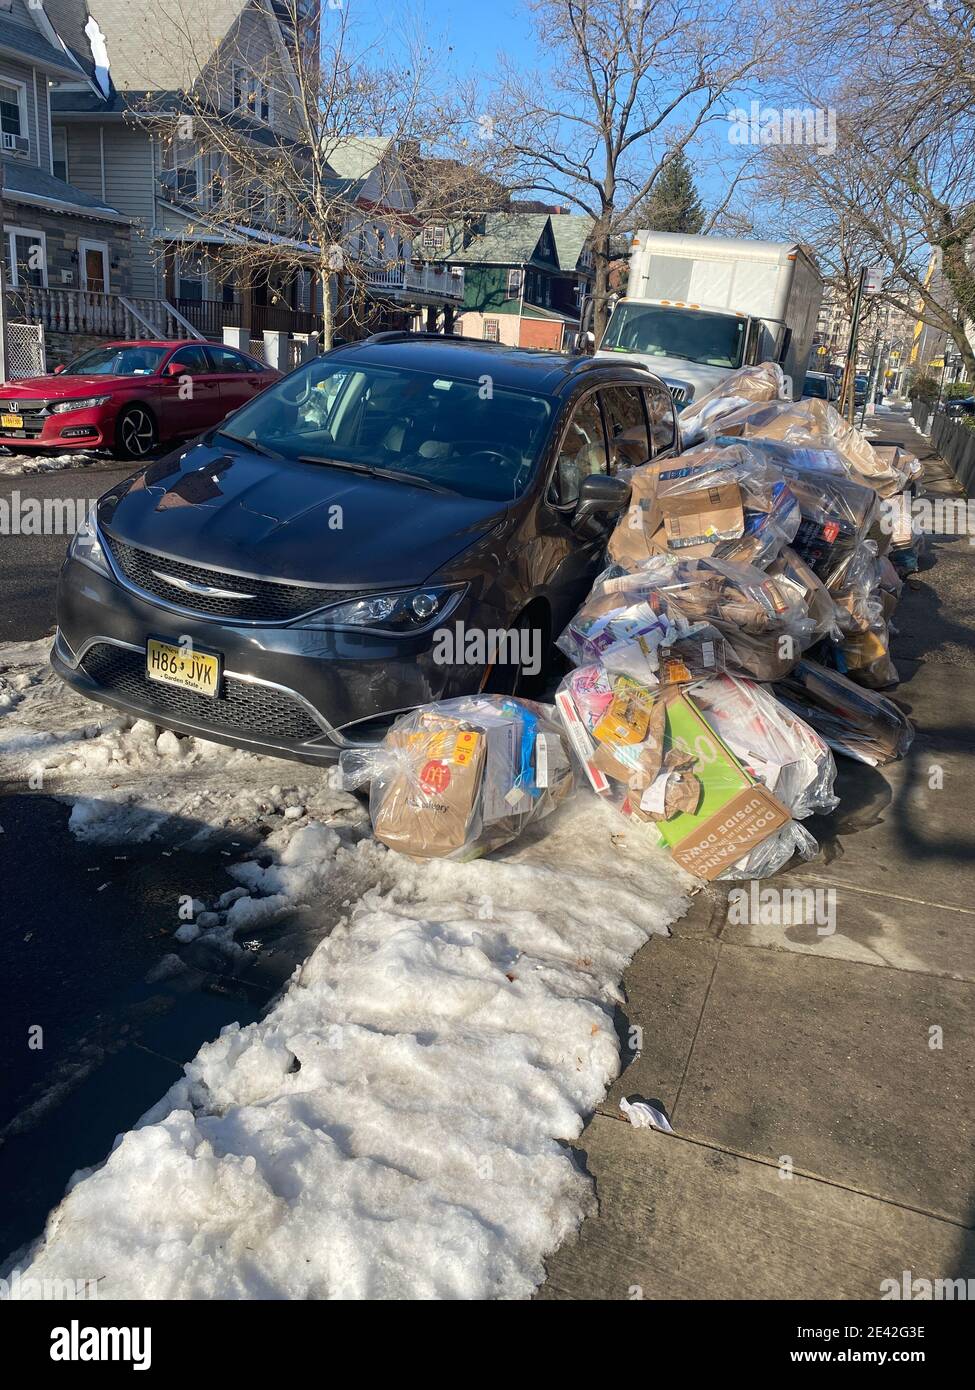 Snow and parked cars makes garbage pickup difficult in New York City where there are no alleys so garbage has to be put out on the street  which makes Stock Photo